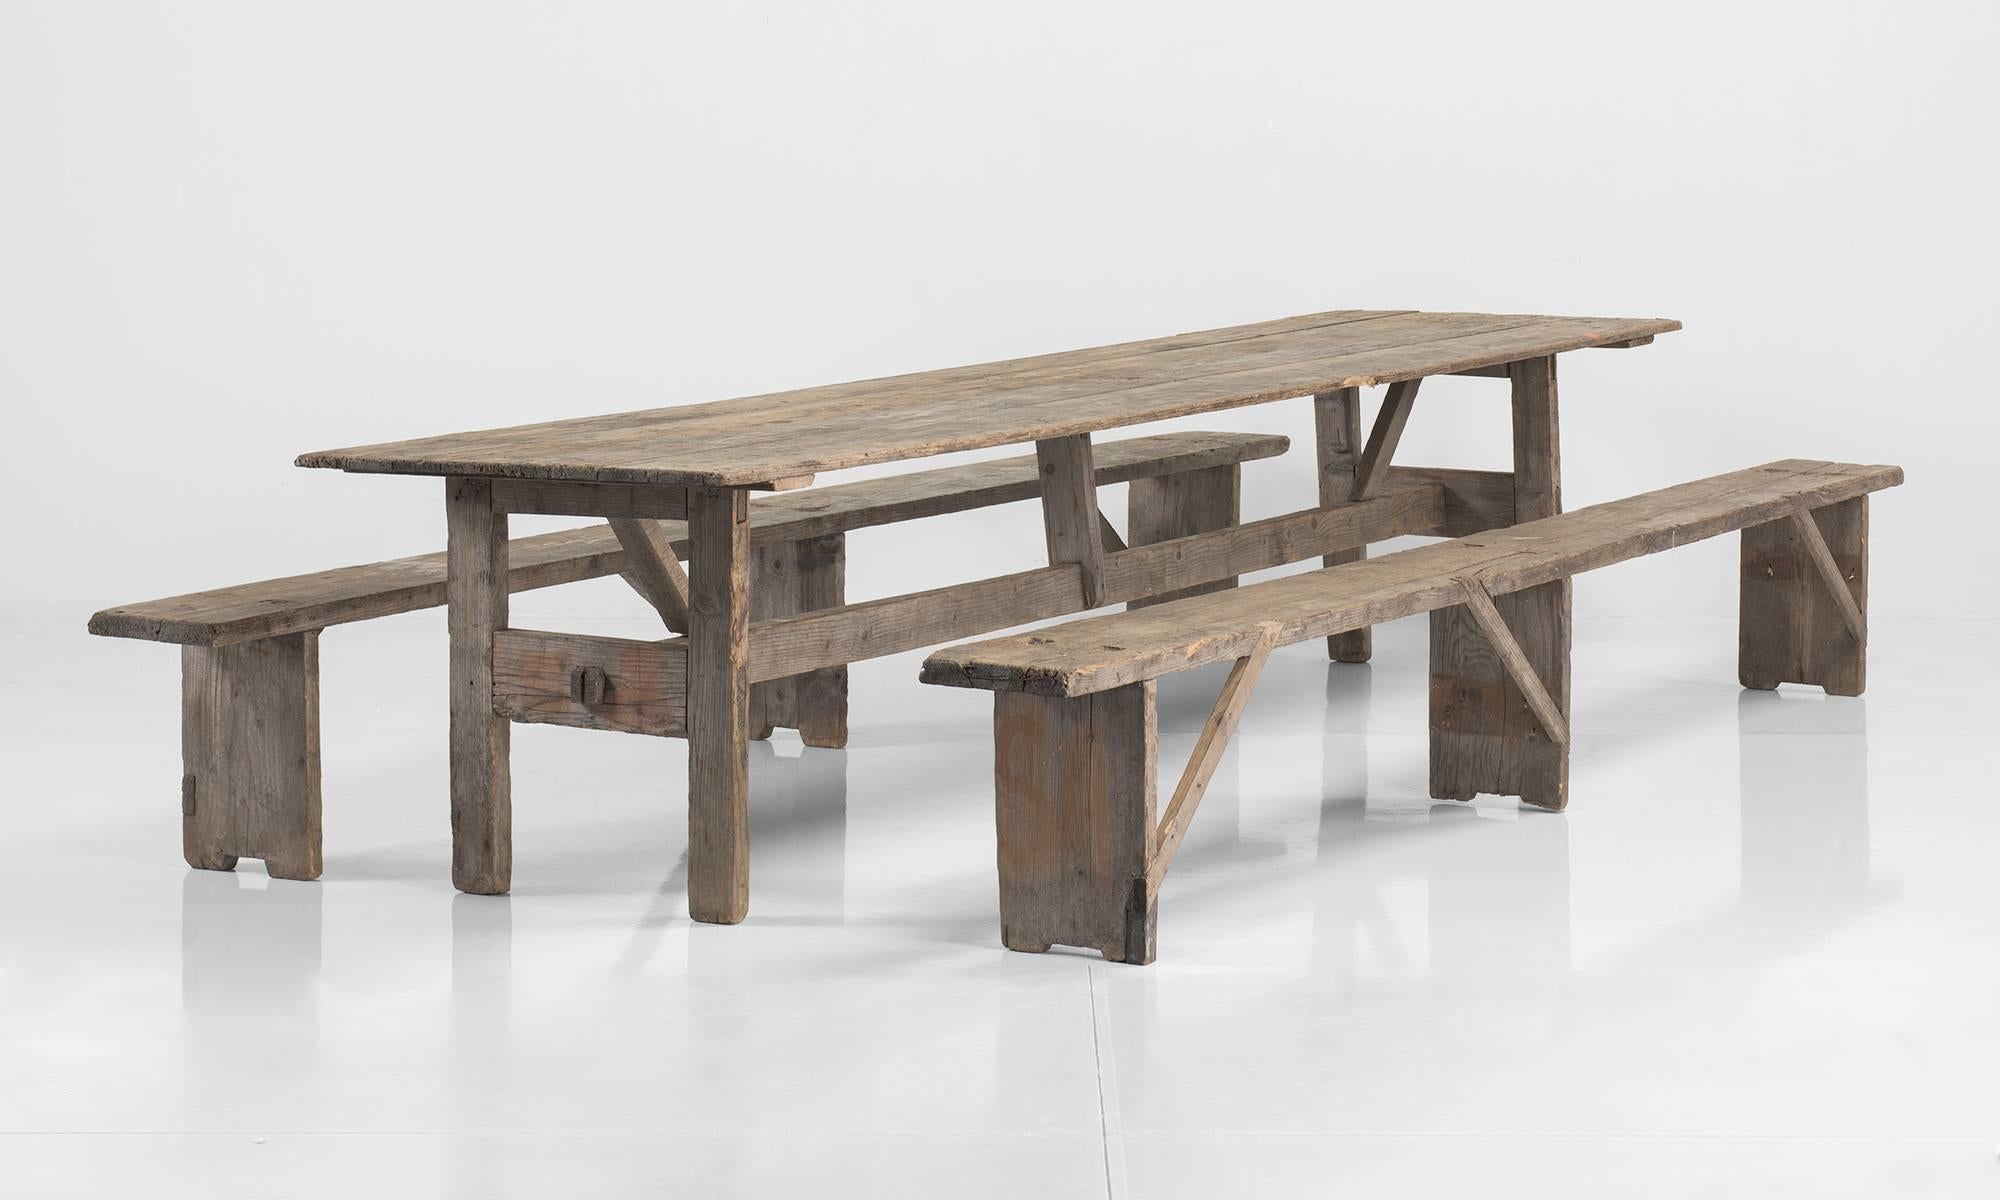 Massive Dining Table with Benches, circa 1900.

Simple form with primitive construction and original benches.